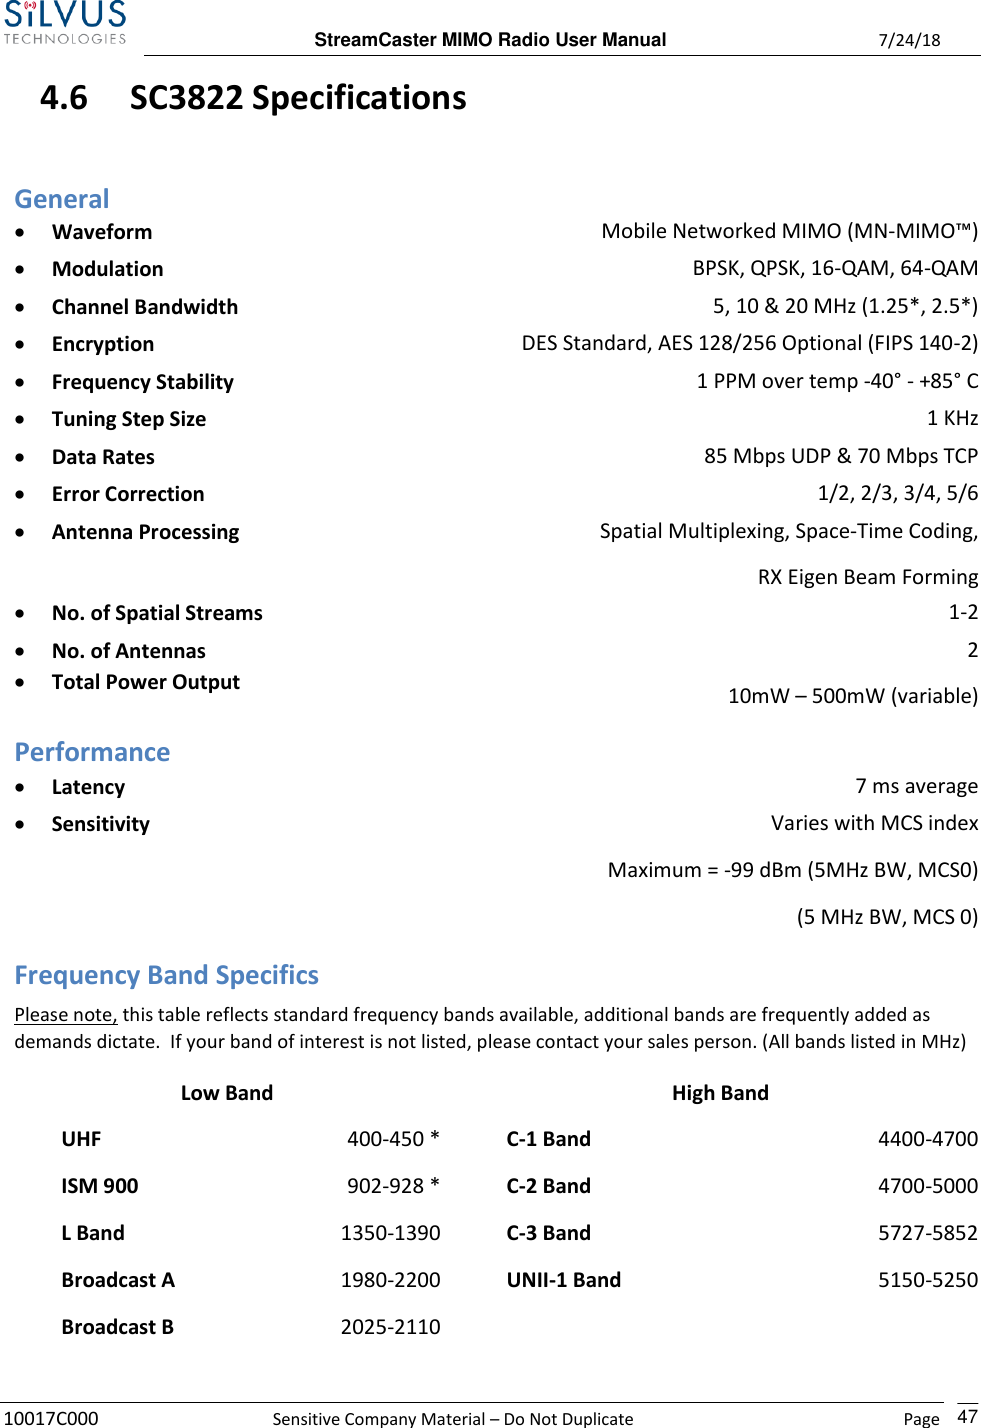  StreamCaster MIMO Radio User Manual  7/24/18 10017C000  Sensitive Company Material – Do Not Duplicate    Page    47 4.6 SC3822 Specifications General • Waveform Mobile Networked MIMO (MN-MIMO™) • Modulation BPSK, QPSK, 16-QAM, 64-QAM • Channel Bandwidth 5, 10 &amp; 20 MHz (1.25*, 2.5*) • Encryption DES Standard, AES 128/256 Optional (FIPS 140-2) • Frequency Stability 1 PPM over temp -40° - +85° C • Tuning Step Size 1 KHz • Data Rates 85 Mbps UDP &amp; 70 Mbps TCP • Error Correction 1/2, 2/3, 3/4, 5/6 • Antenna Processing Spatial Multiplexing, Space-Time Coding, RX Eigen Beam Forming • No. of Spatial Streams 1-2 • No. of Antennas • Total Power Output 2 10mW – 500mW (variable)  Performance • Latency 7 ms average • Sensitivity Varies with MCS index Maximum = -99 dBm (5MHz BW, MCS0) (5 MHz BW, MCS 0) Frequency Band Specifics Please note, this table reflects standard frequency bands available, additional bands are frequently added as demands dictate.  If your band of interest is not listed, please contact your sales person. (All bands listed in MHz)  Low Band High Band  UHF 400-450 *  C-1 Band 4400-4700   ISM 900 902-928 *  C-2 Band 4700-5000  L Band 1350-1390  C-3 Band 5727-5852   Broadcast A 1980-2200  UNII-1 Band 5150-5250  Broadcast B 2025-2110    